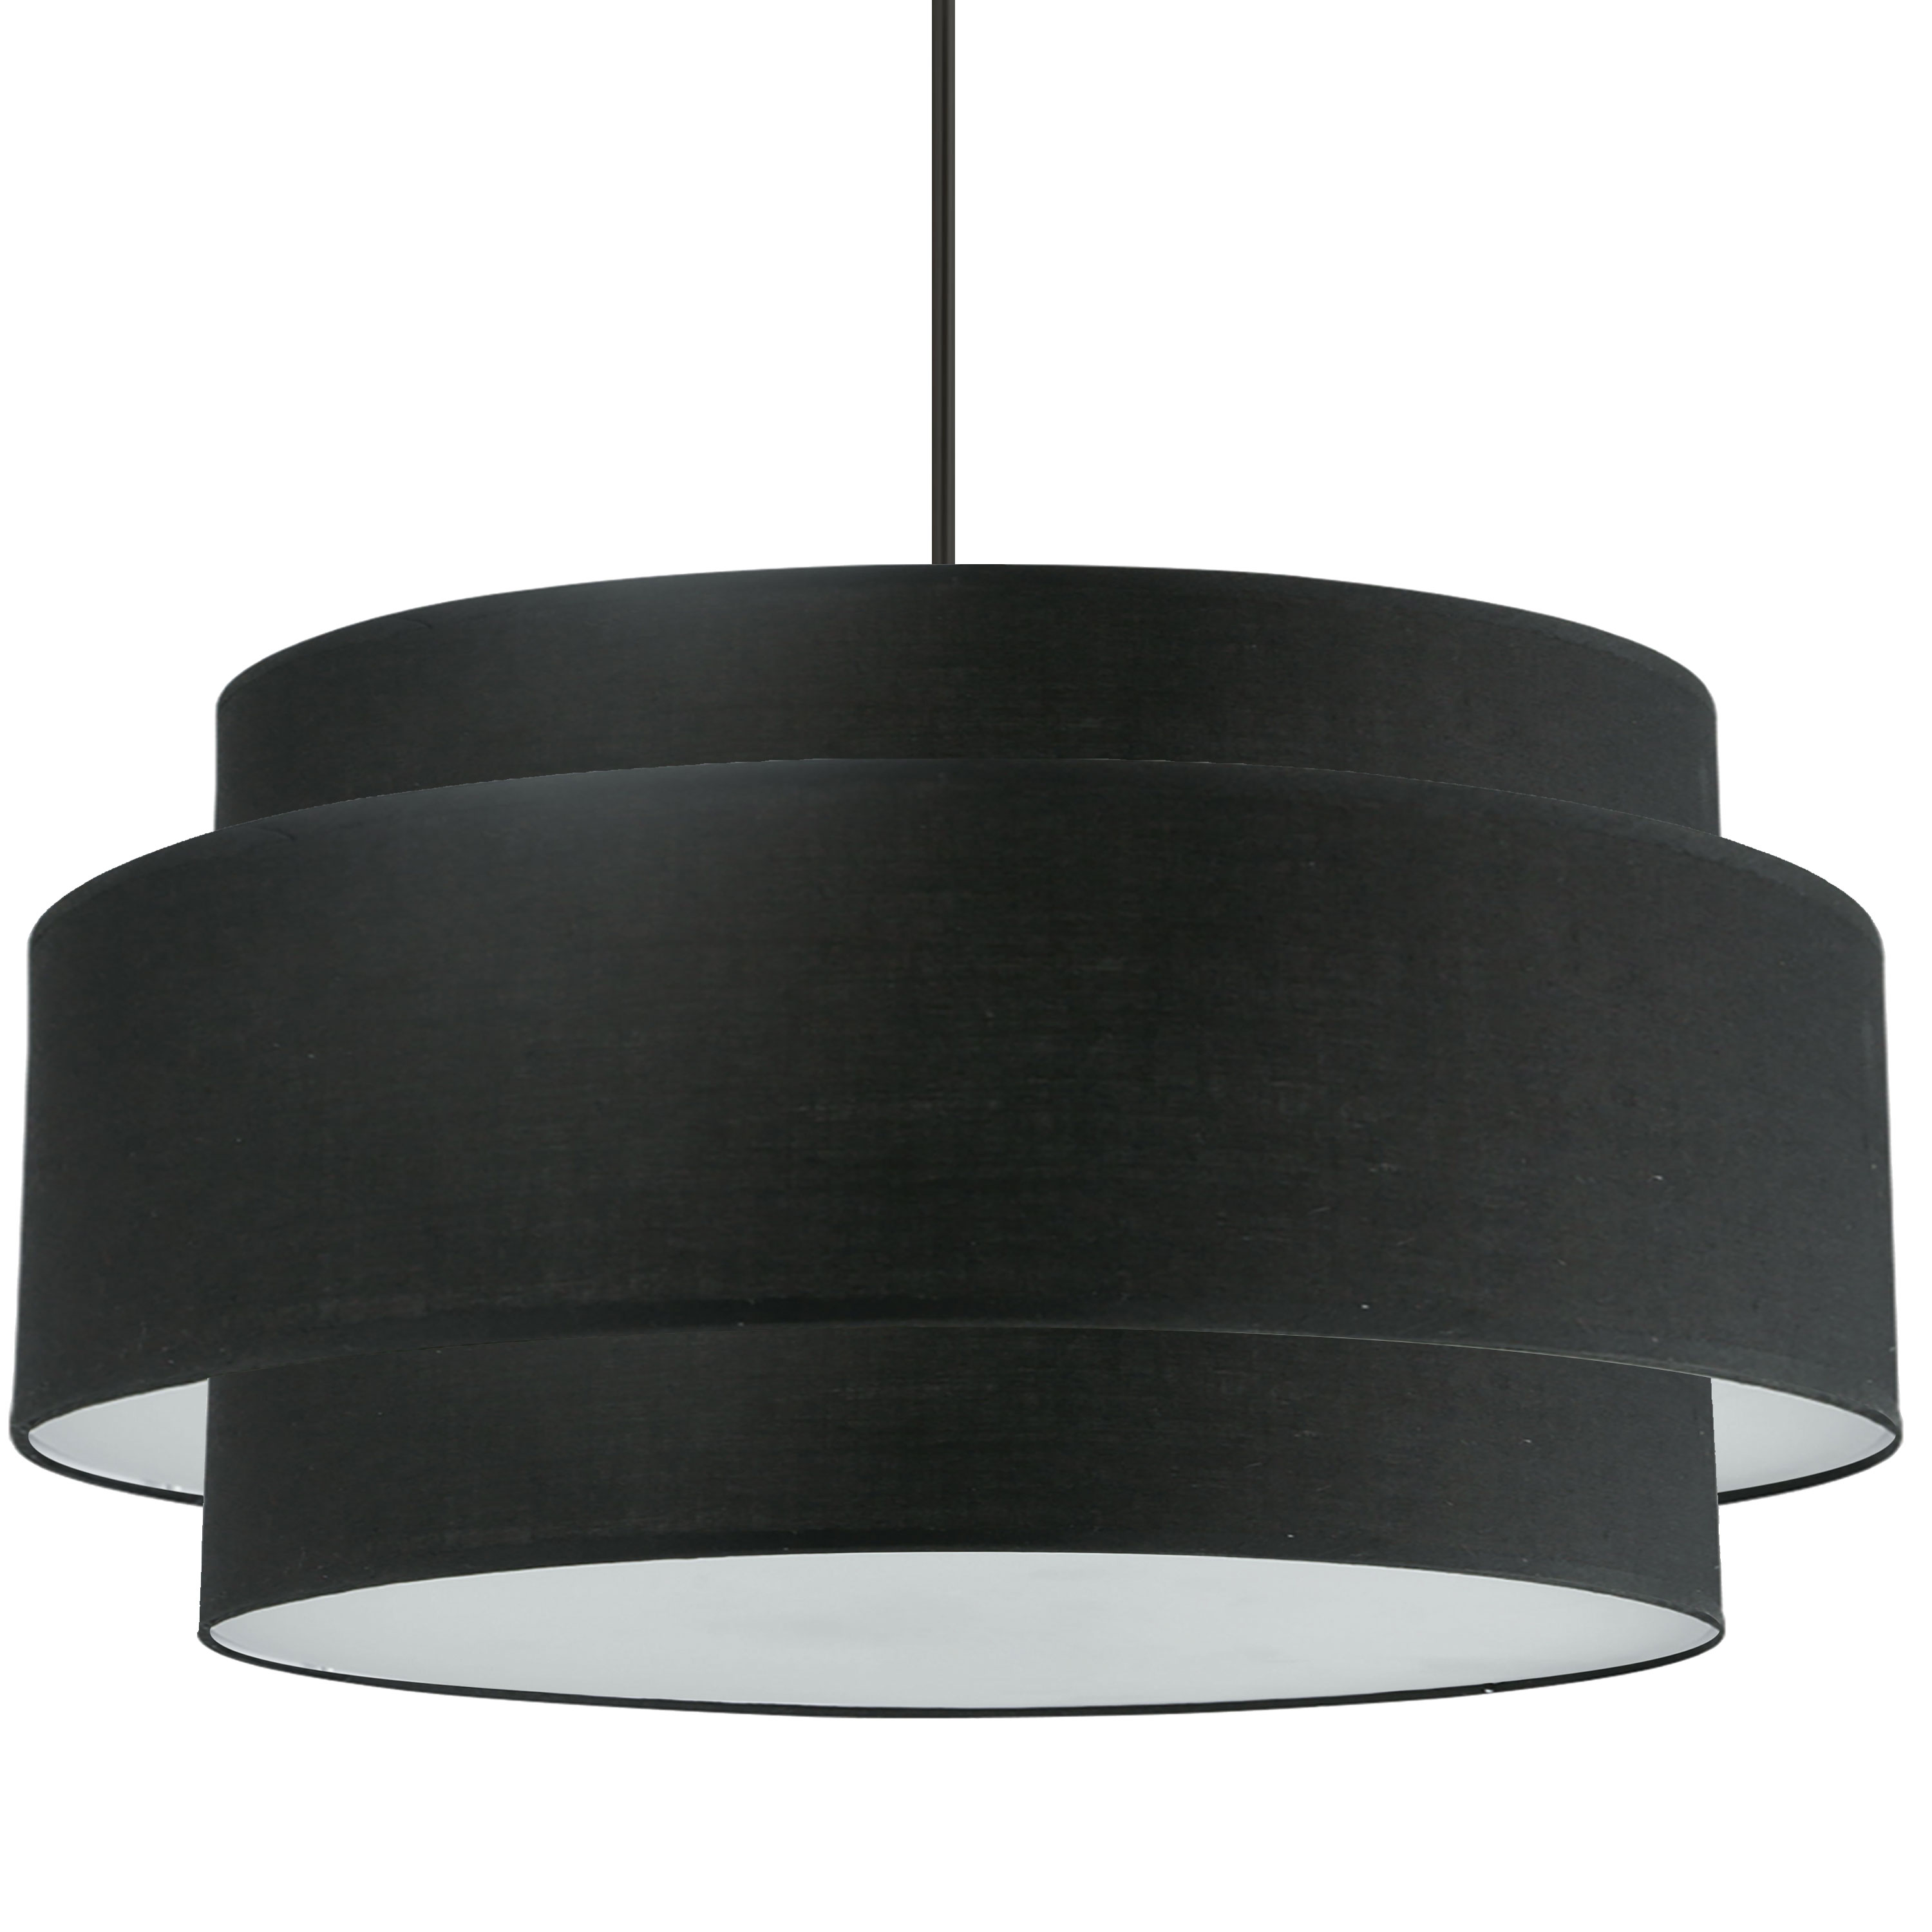 Add a pop of artisan-style allure to your home with the Priya family of lighting. With its multi-dimensional construction, it creates curves and textural interest in contemporary or minimalist design schemes. From a simple drop, the design is constructed with overlapping fabric drum shades. Color options include subtle monochromatic as well as contrasting configurations for added eye appeal. The effect is simple, yet stylish, and suitable for living or dining rooms, kitchens and hallways.